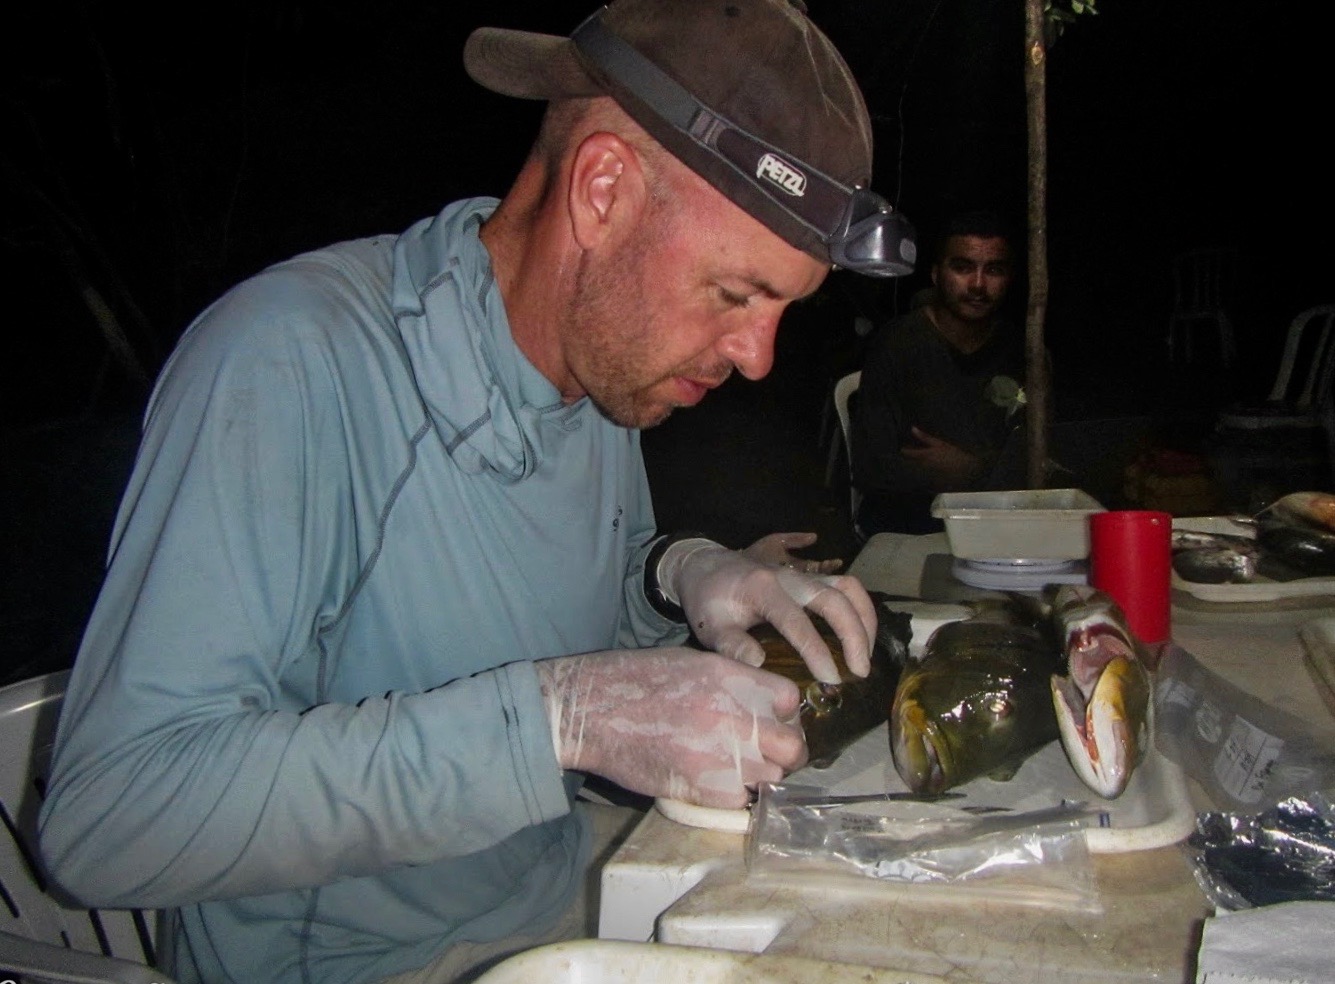 Scientist in the field removes fish eye lens from a fish in Brazil for research.